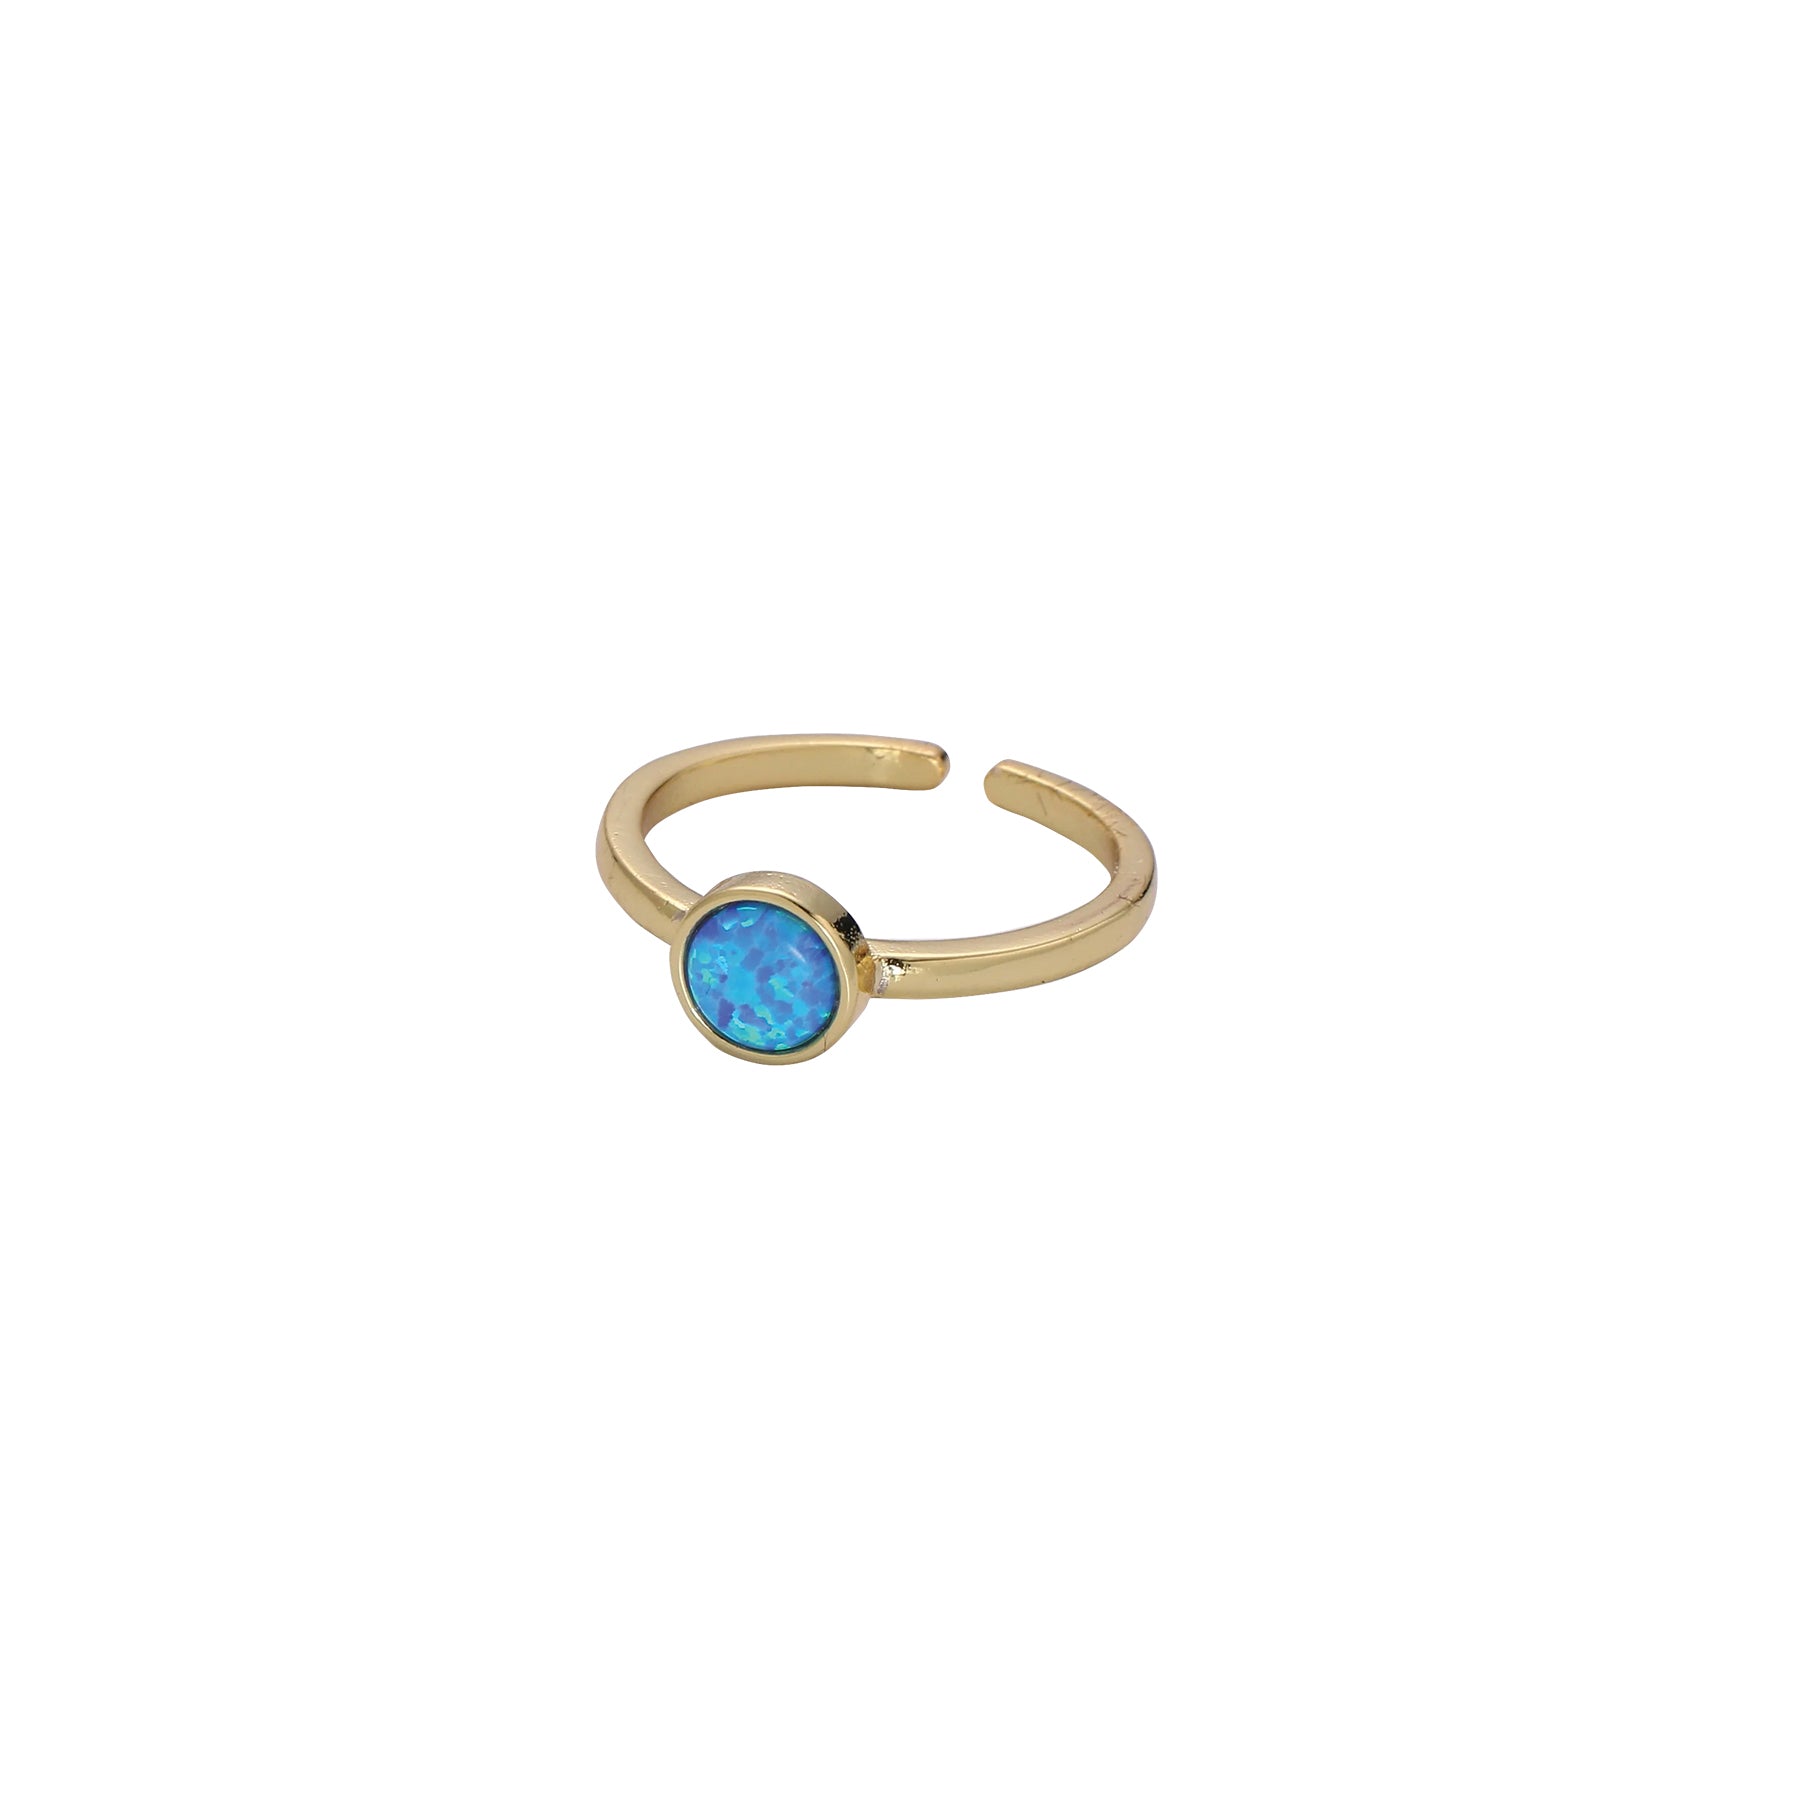 Gold and blue opal ring